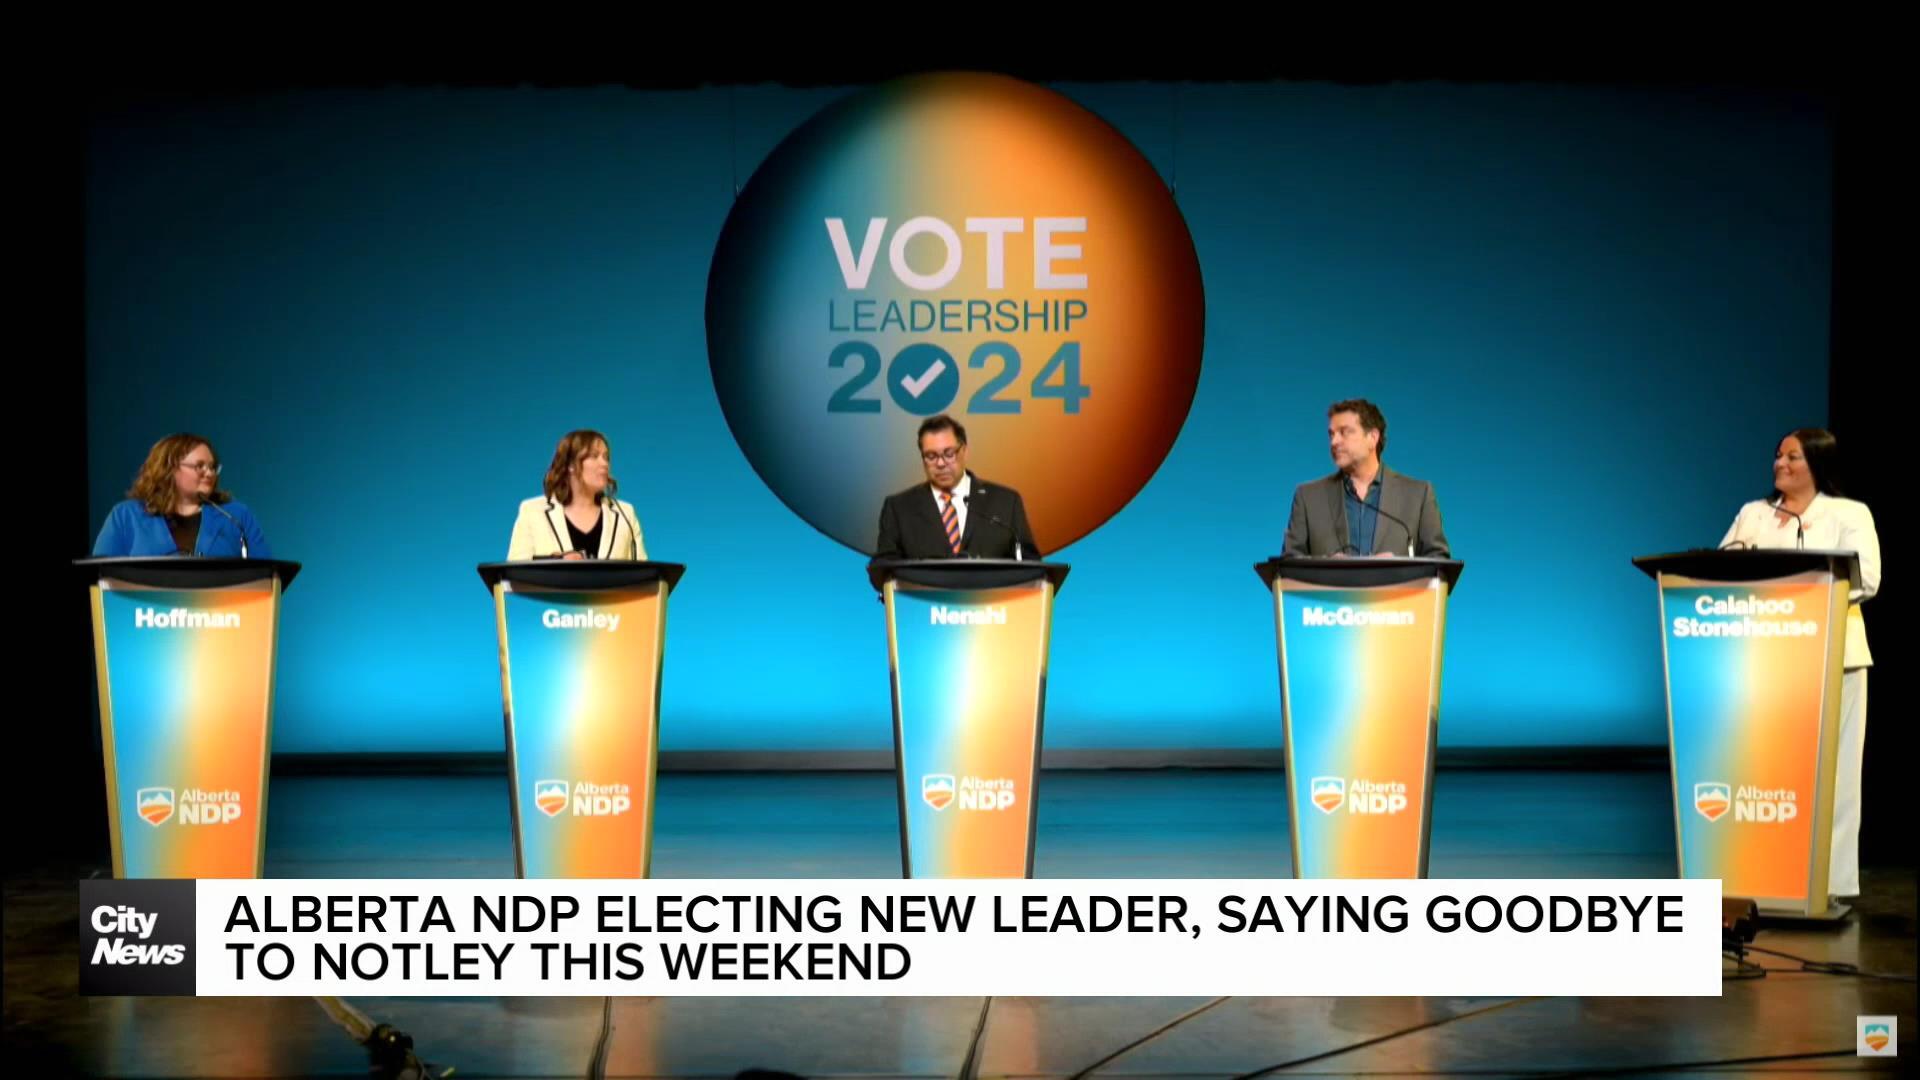 NDP electing new leader this weekend